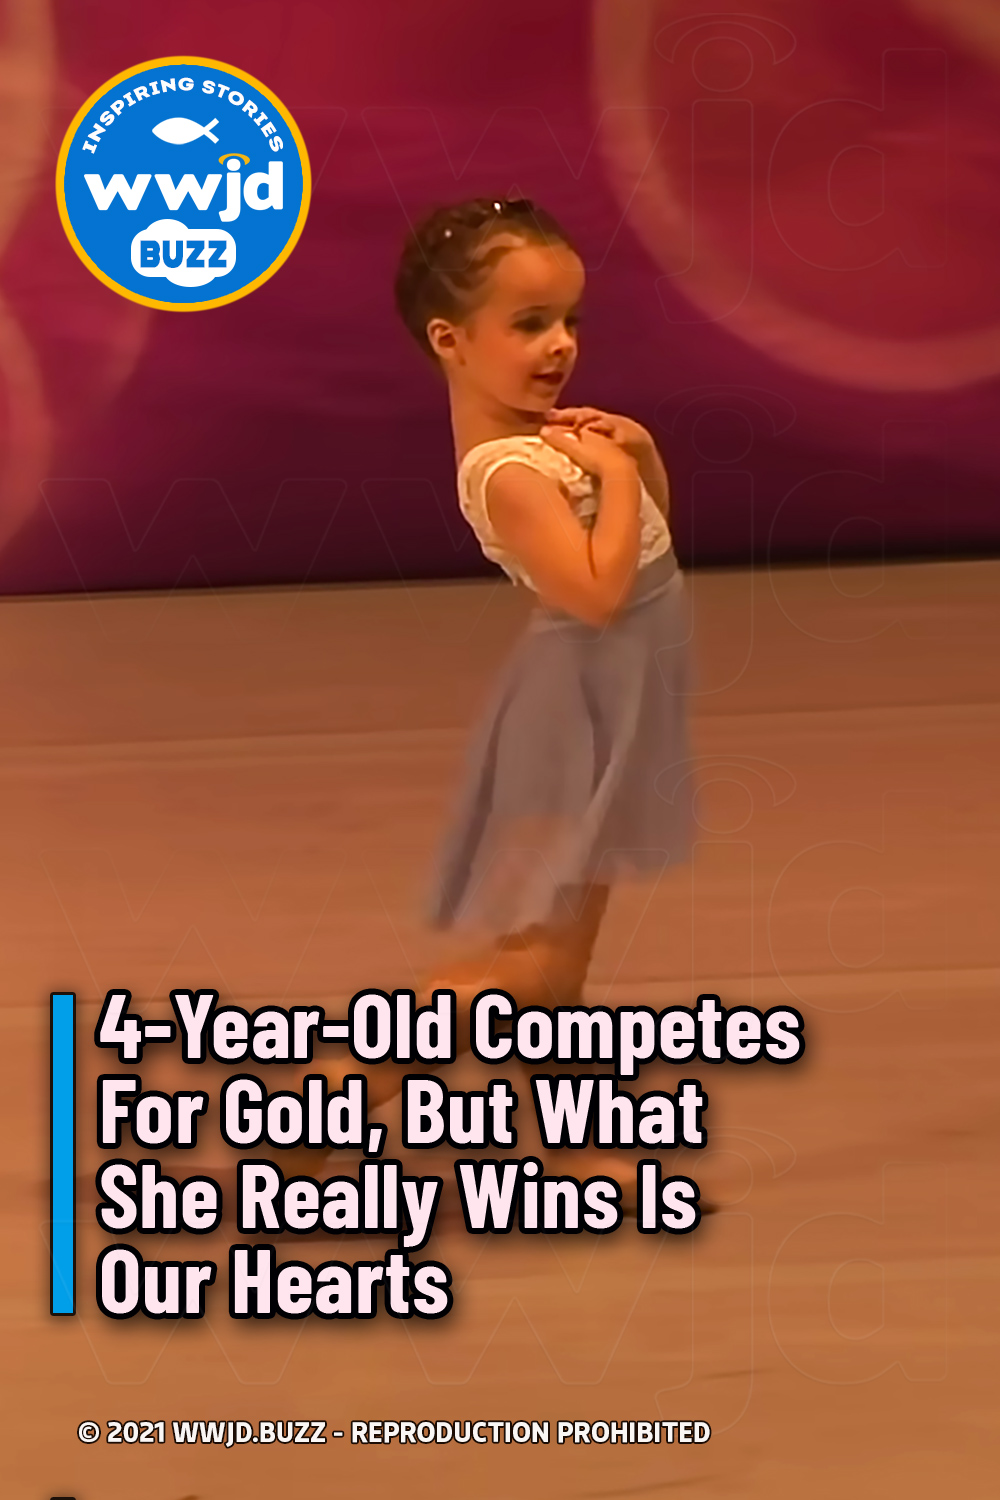 4-Year-Old Competes For Gold, But What She Really Wins Is Our Hearts